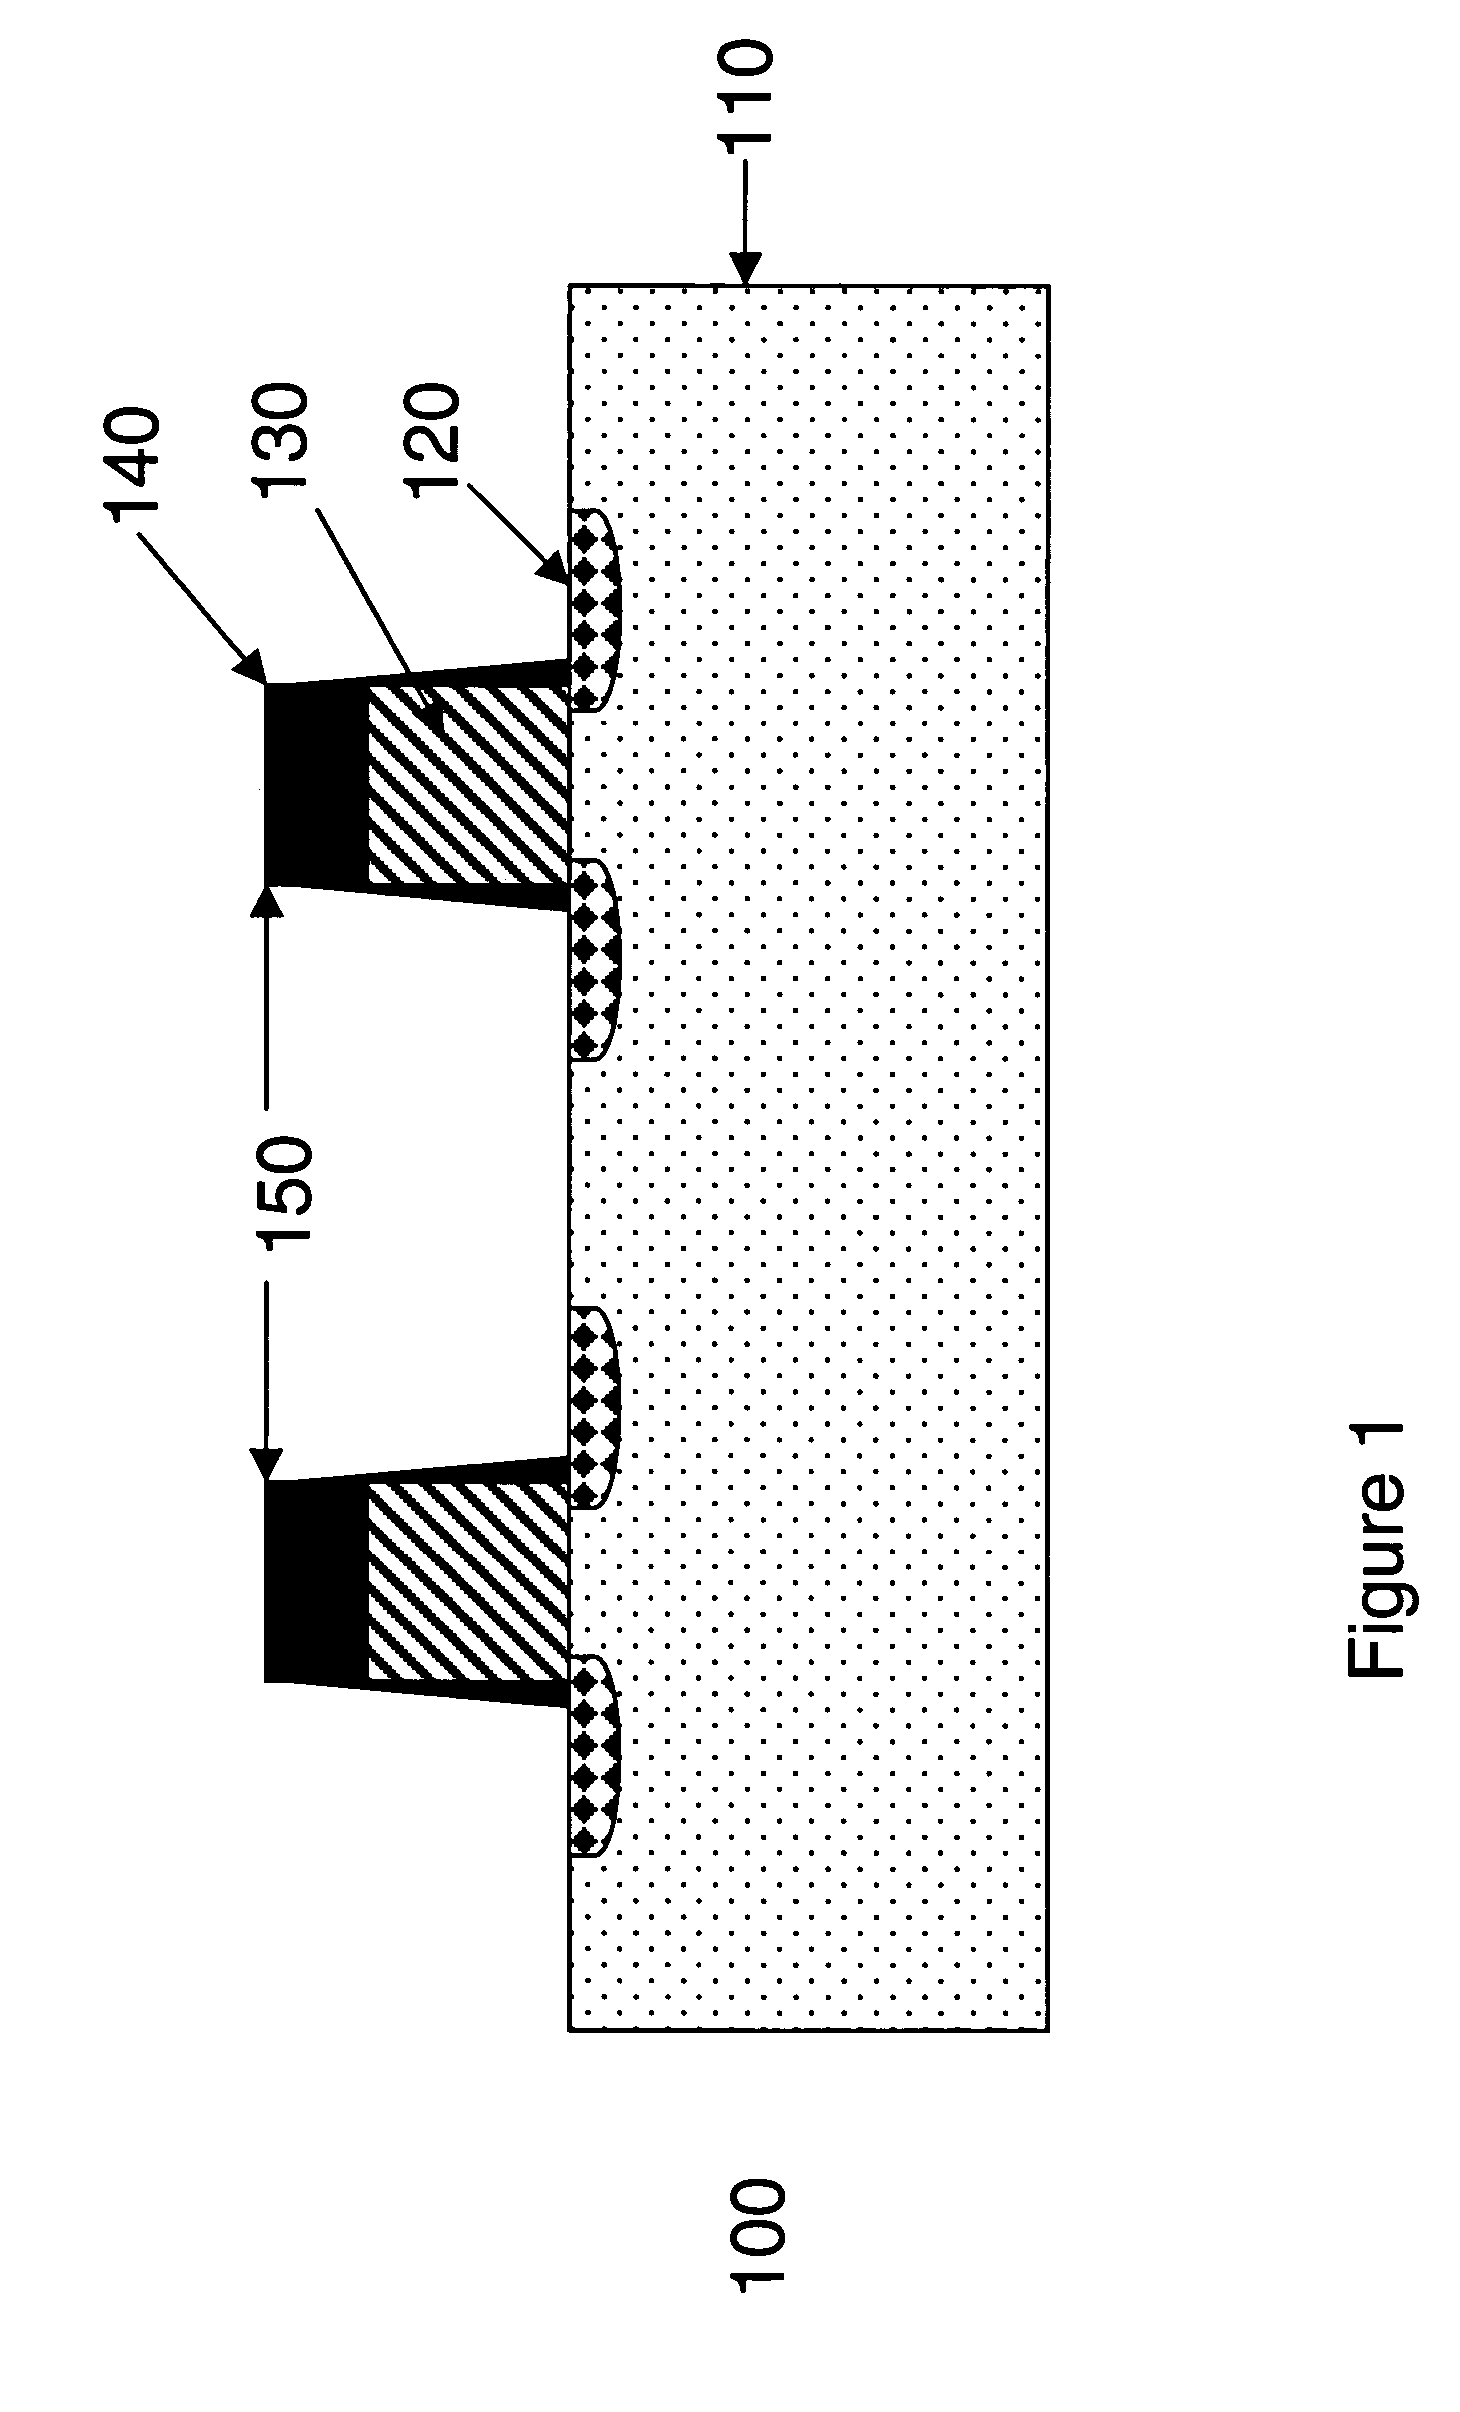 Process for making byte erasable devices having elements made with nanotubes